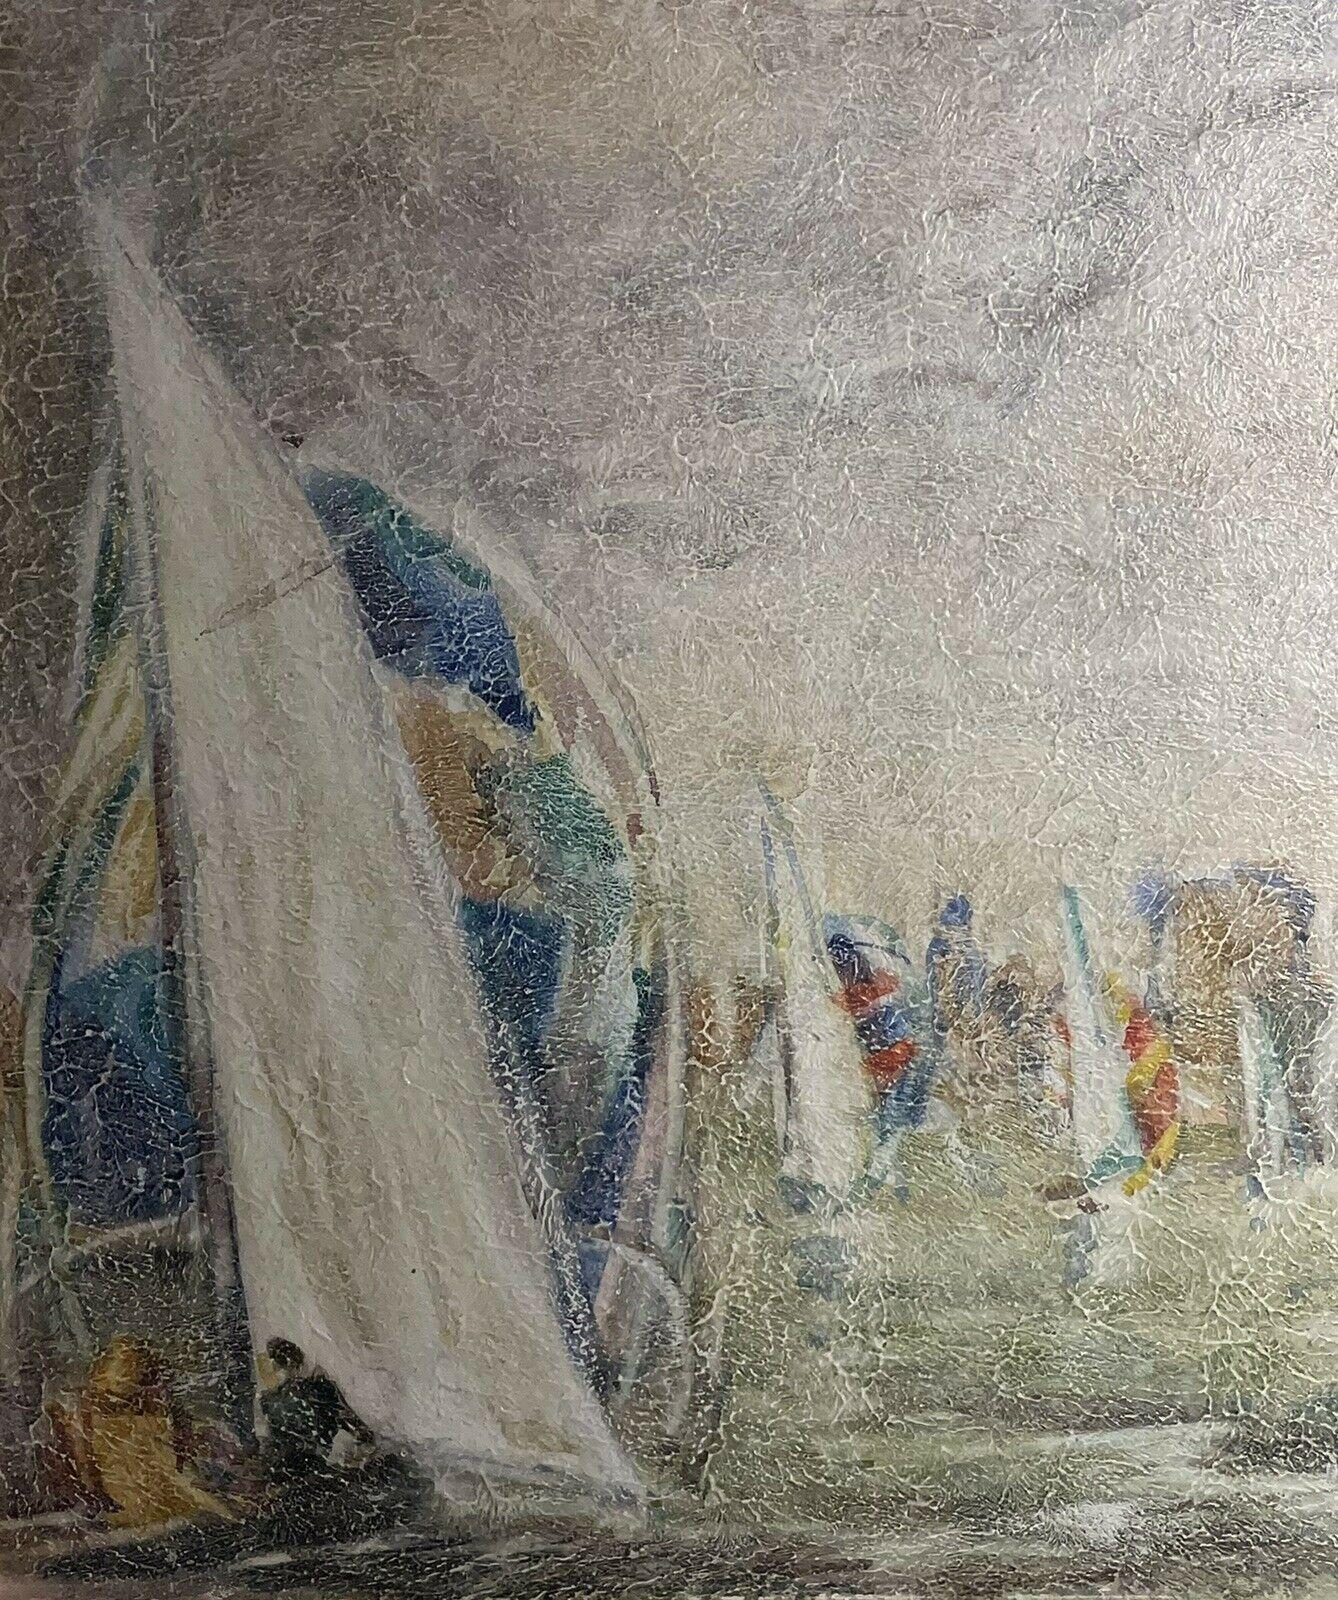 Artist/ School: French School, signed and dated 1972

Title: Racing Yachts at Sea

Medium: oil painting on board, framed

Size:   framed: 18 x 21 inches
              board: 15 x 18 inches

Provenance: private collection, France

Condition: The